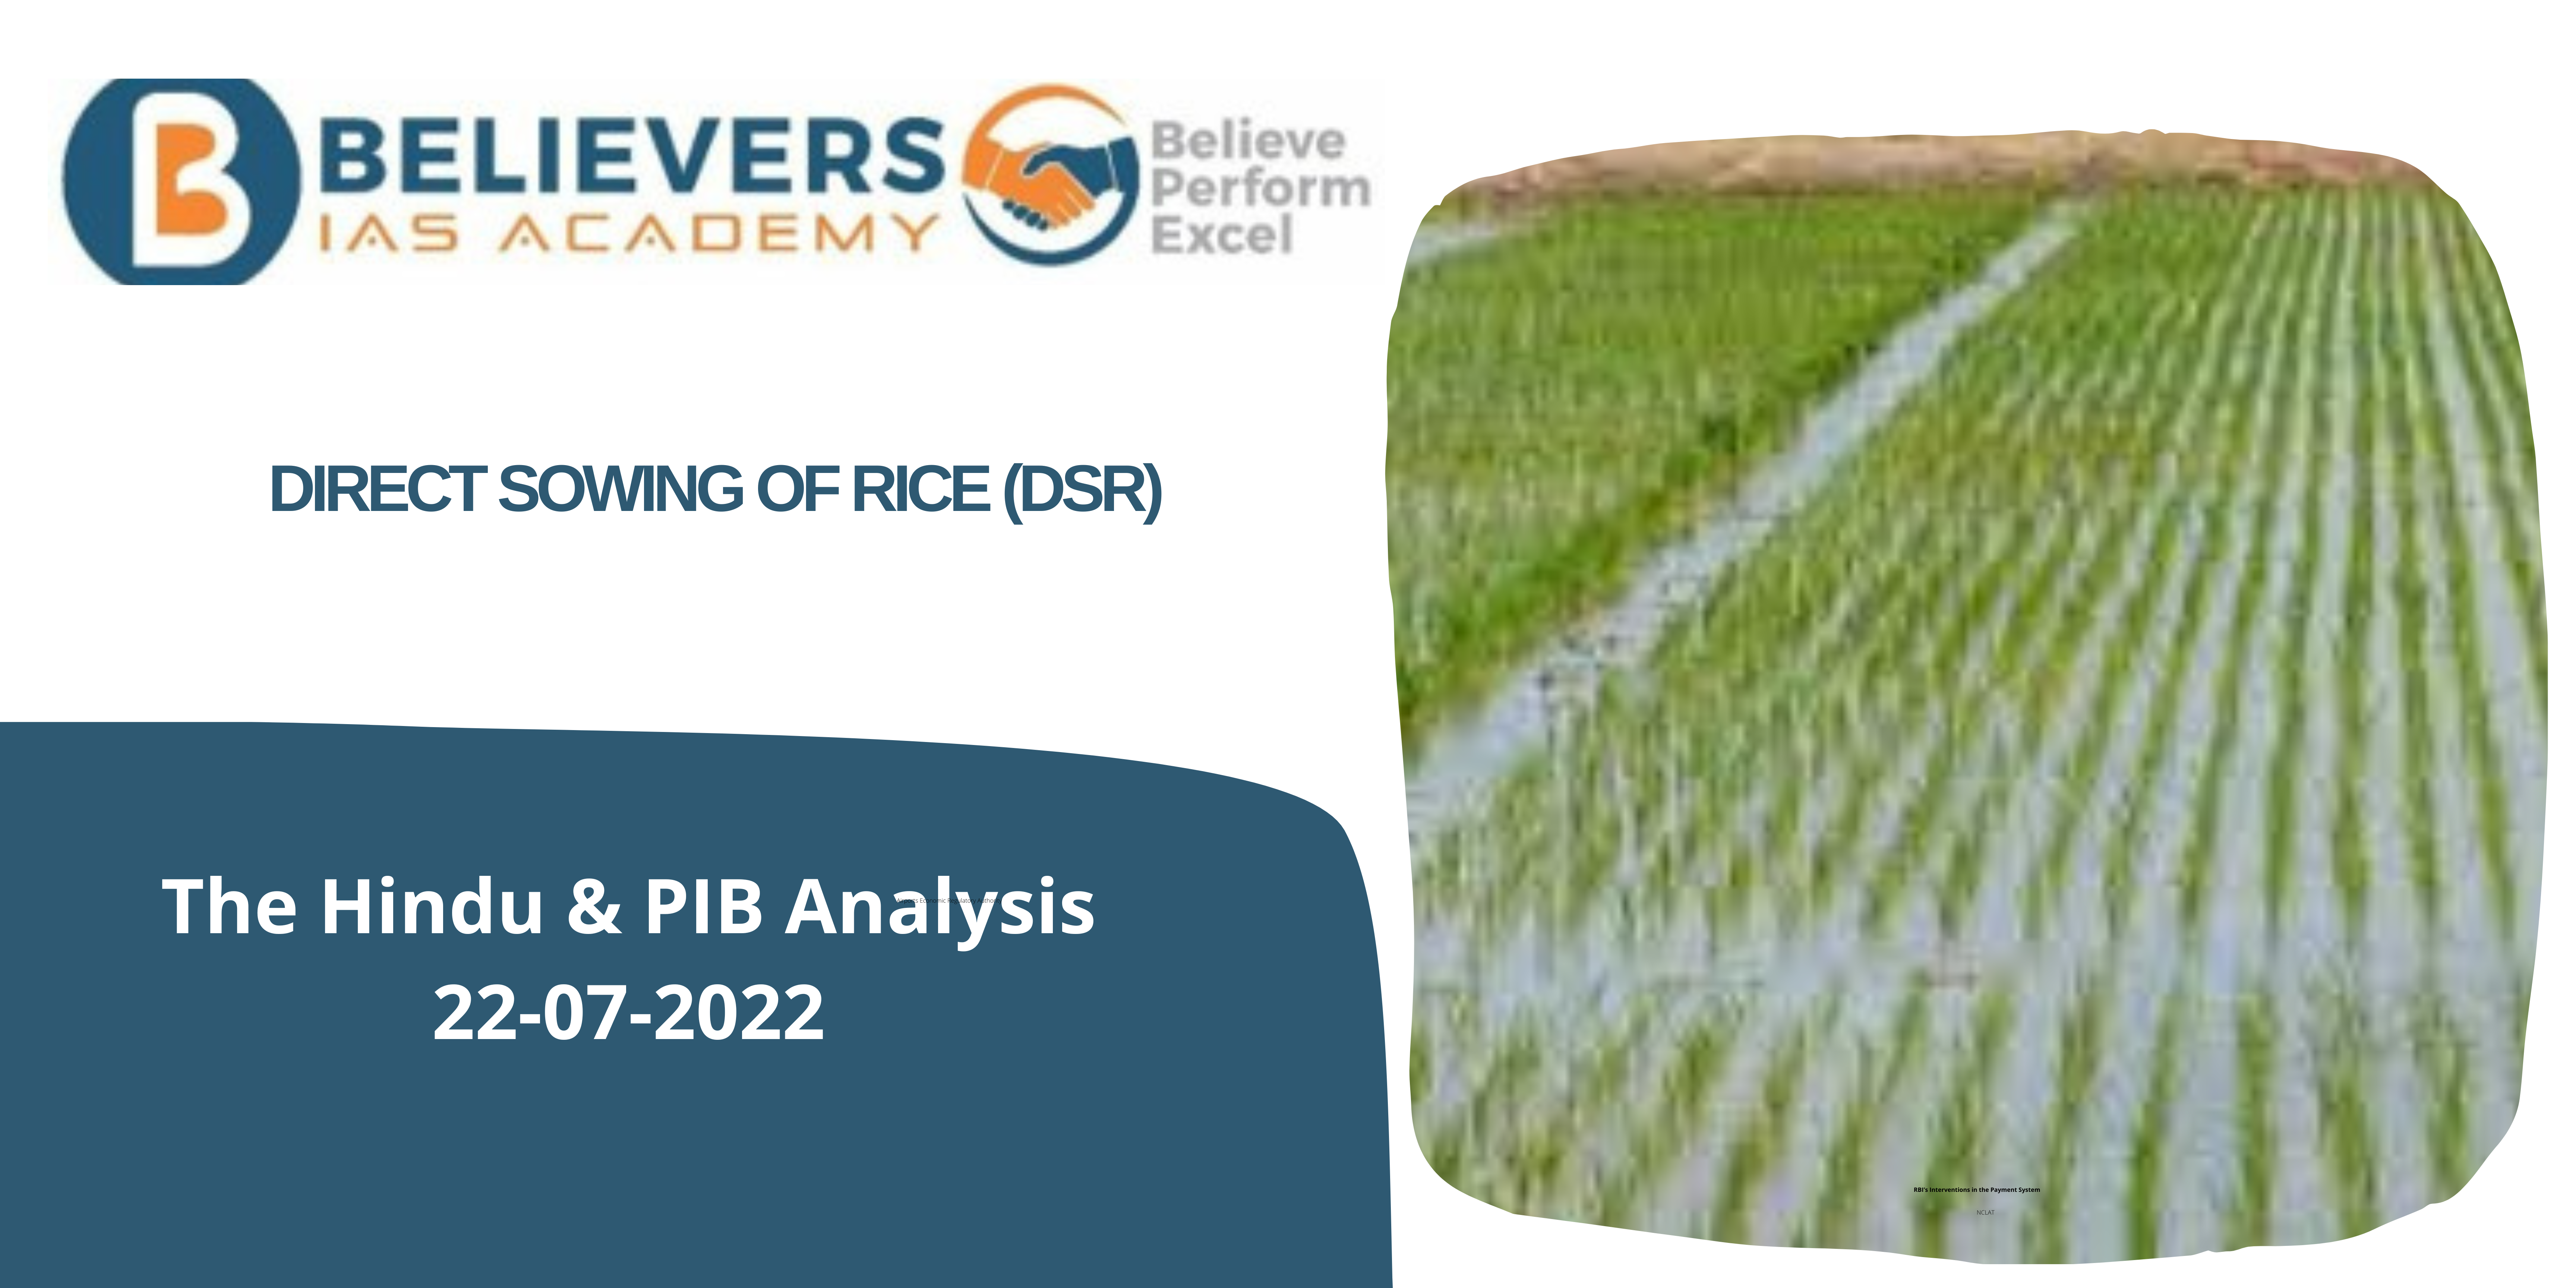 IAS Current affairs - Direct Sowing of Rice (DSR)